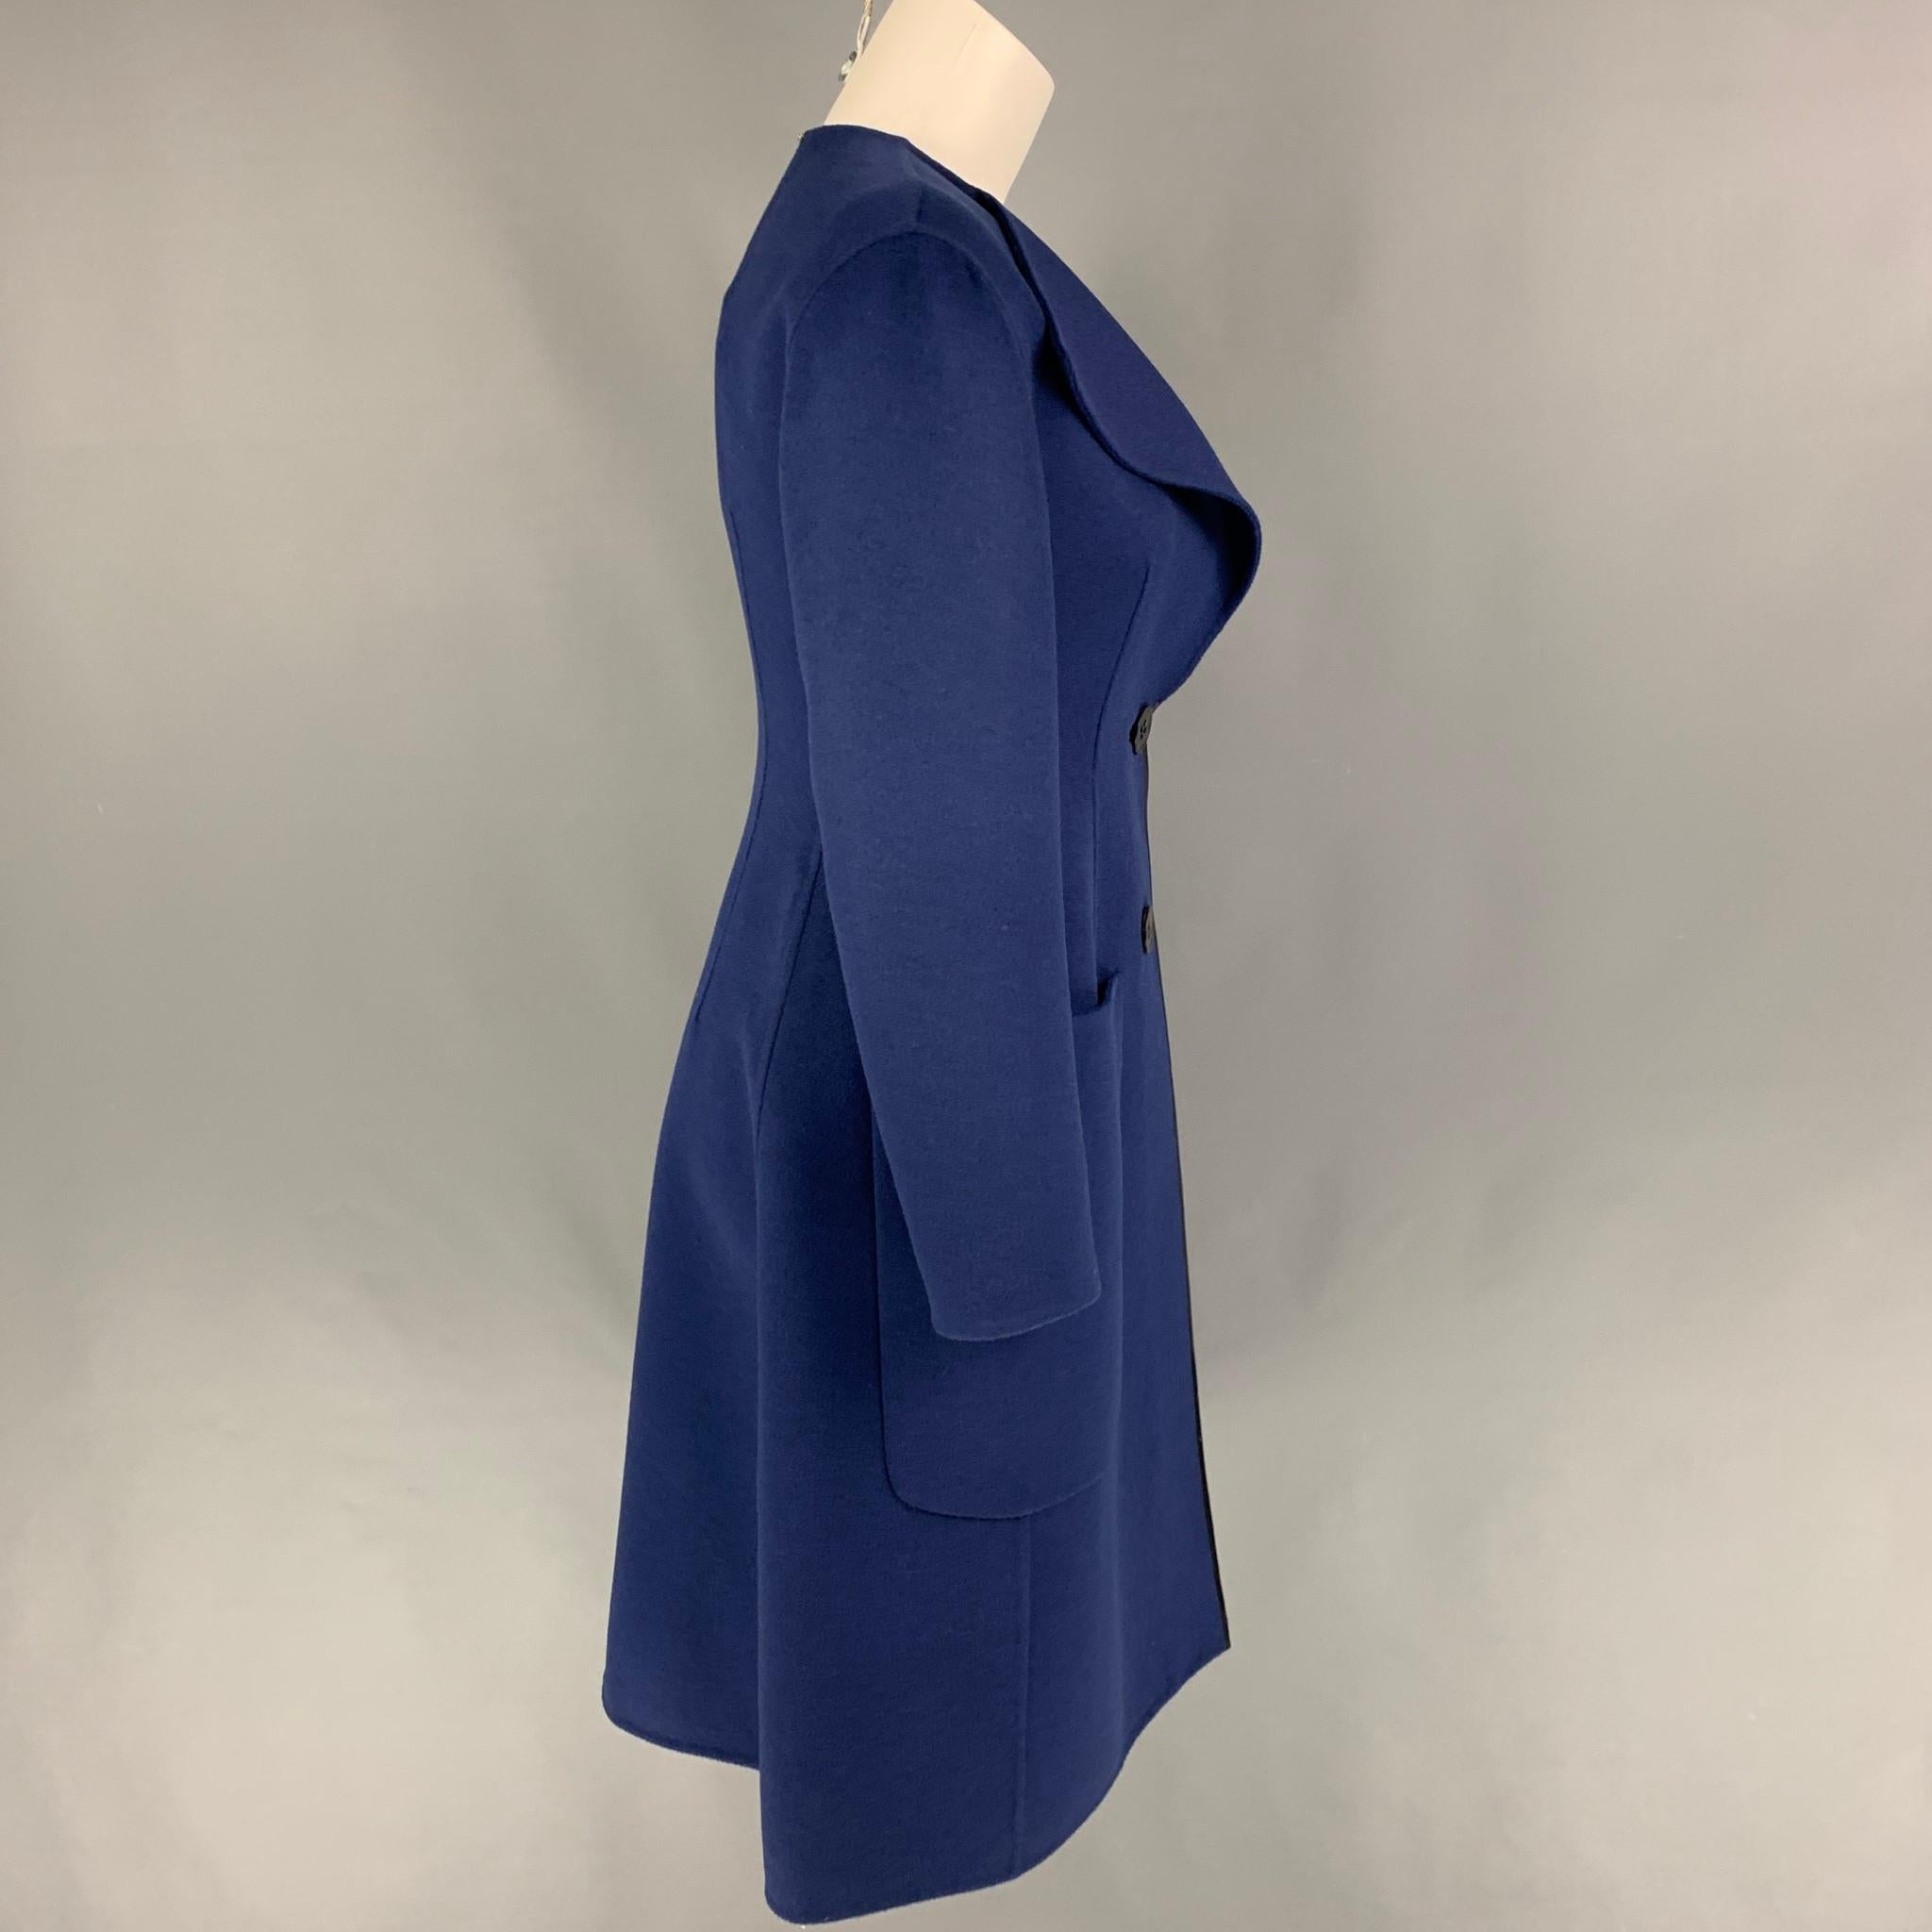 SPORTMAX coat comes in a blue virgin wool / angora featuring a large lapel, satin trim, patch pockets, and a double button closure.  

New With Tags. 
Marked: 2
Original Retail Price: $2,450.00

Measurements:

Shoulder: 16 in.
Bust: 30 in.
Sleeve: